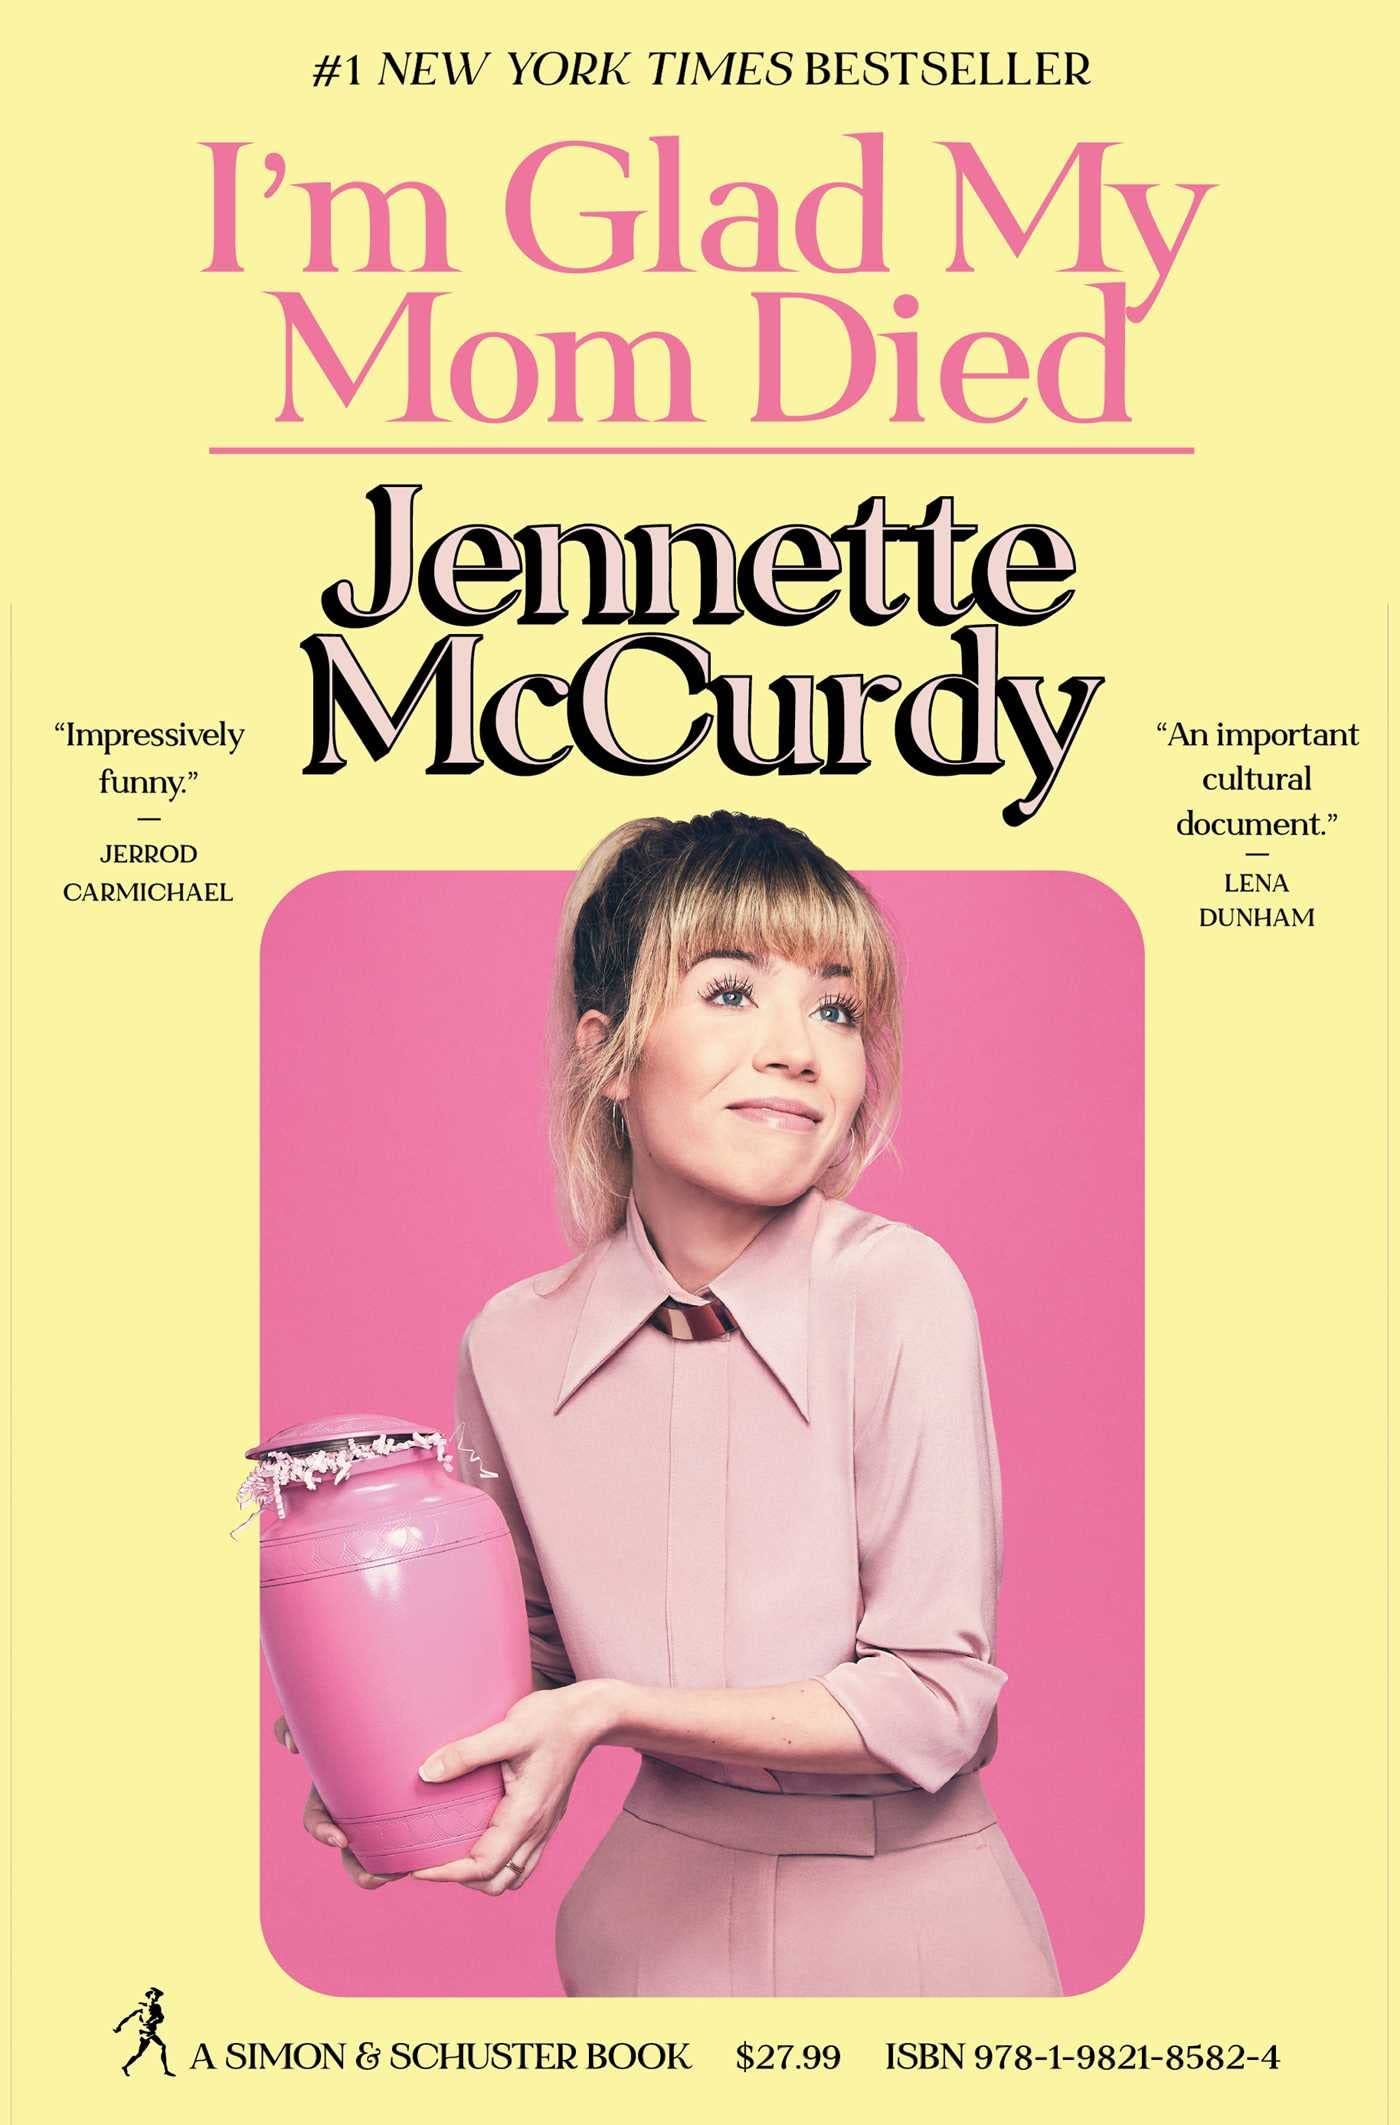 I'm Glad My Mom Died: McCurdy, Jennette: 9781982185824: Books - Amazon.ca